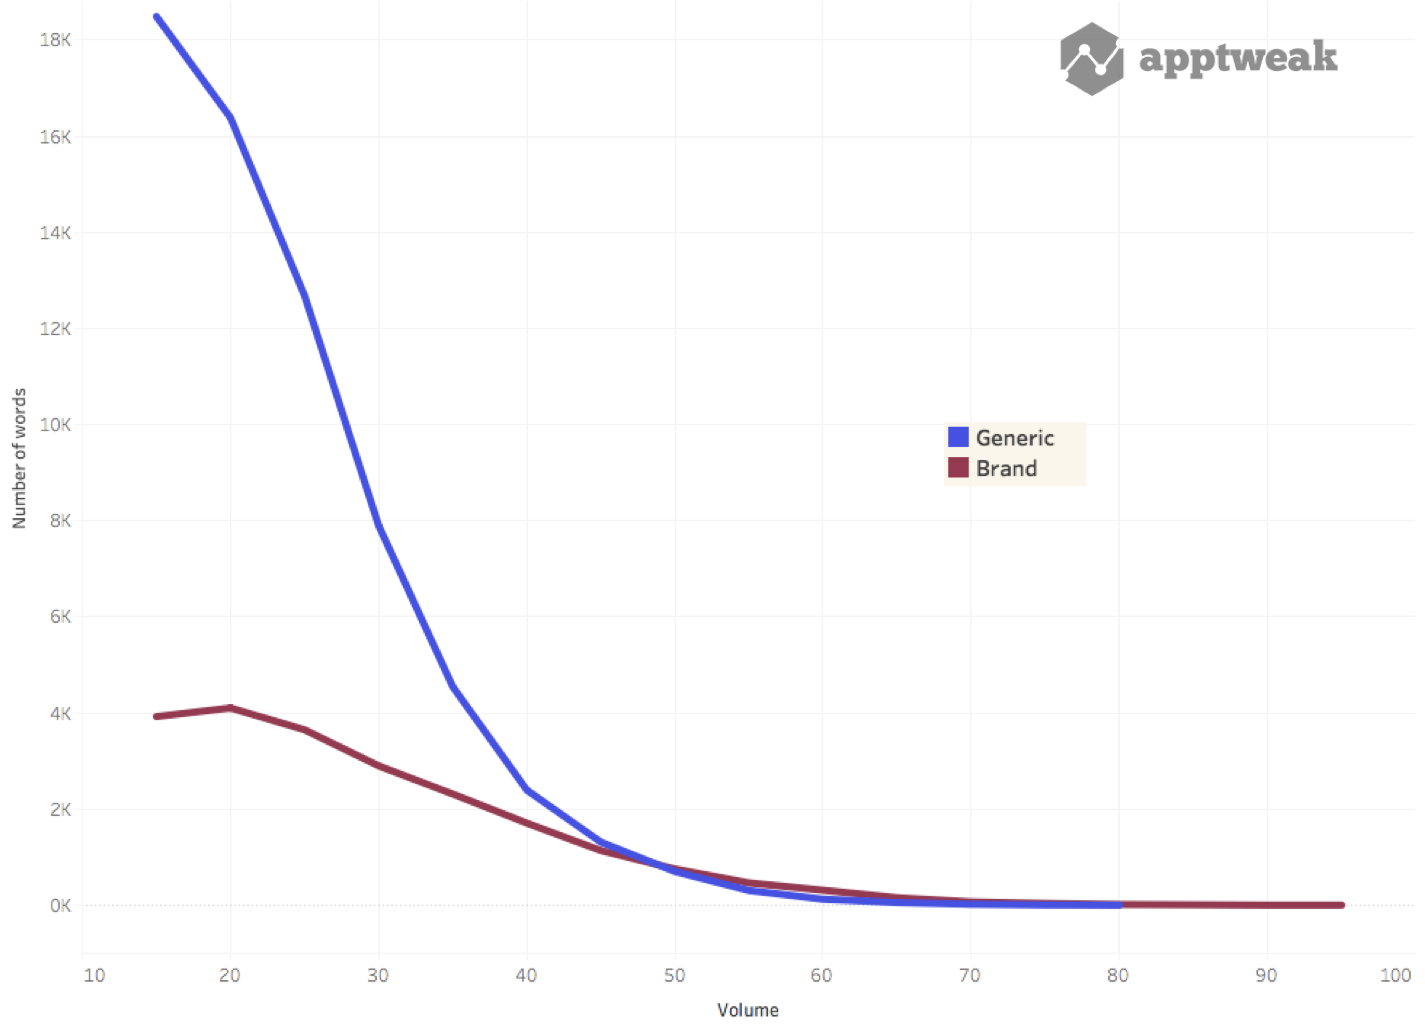 The proportion of unique brand vs. generic keywords across volume on the US Apple App Store